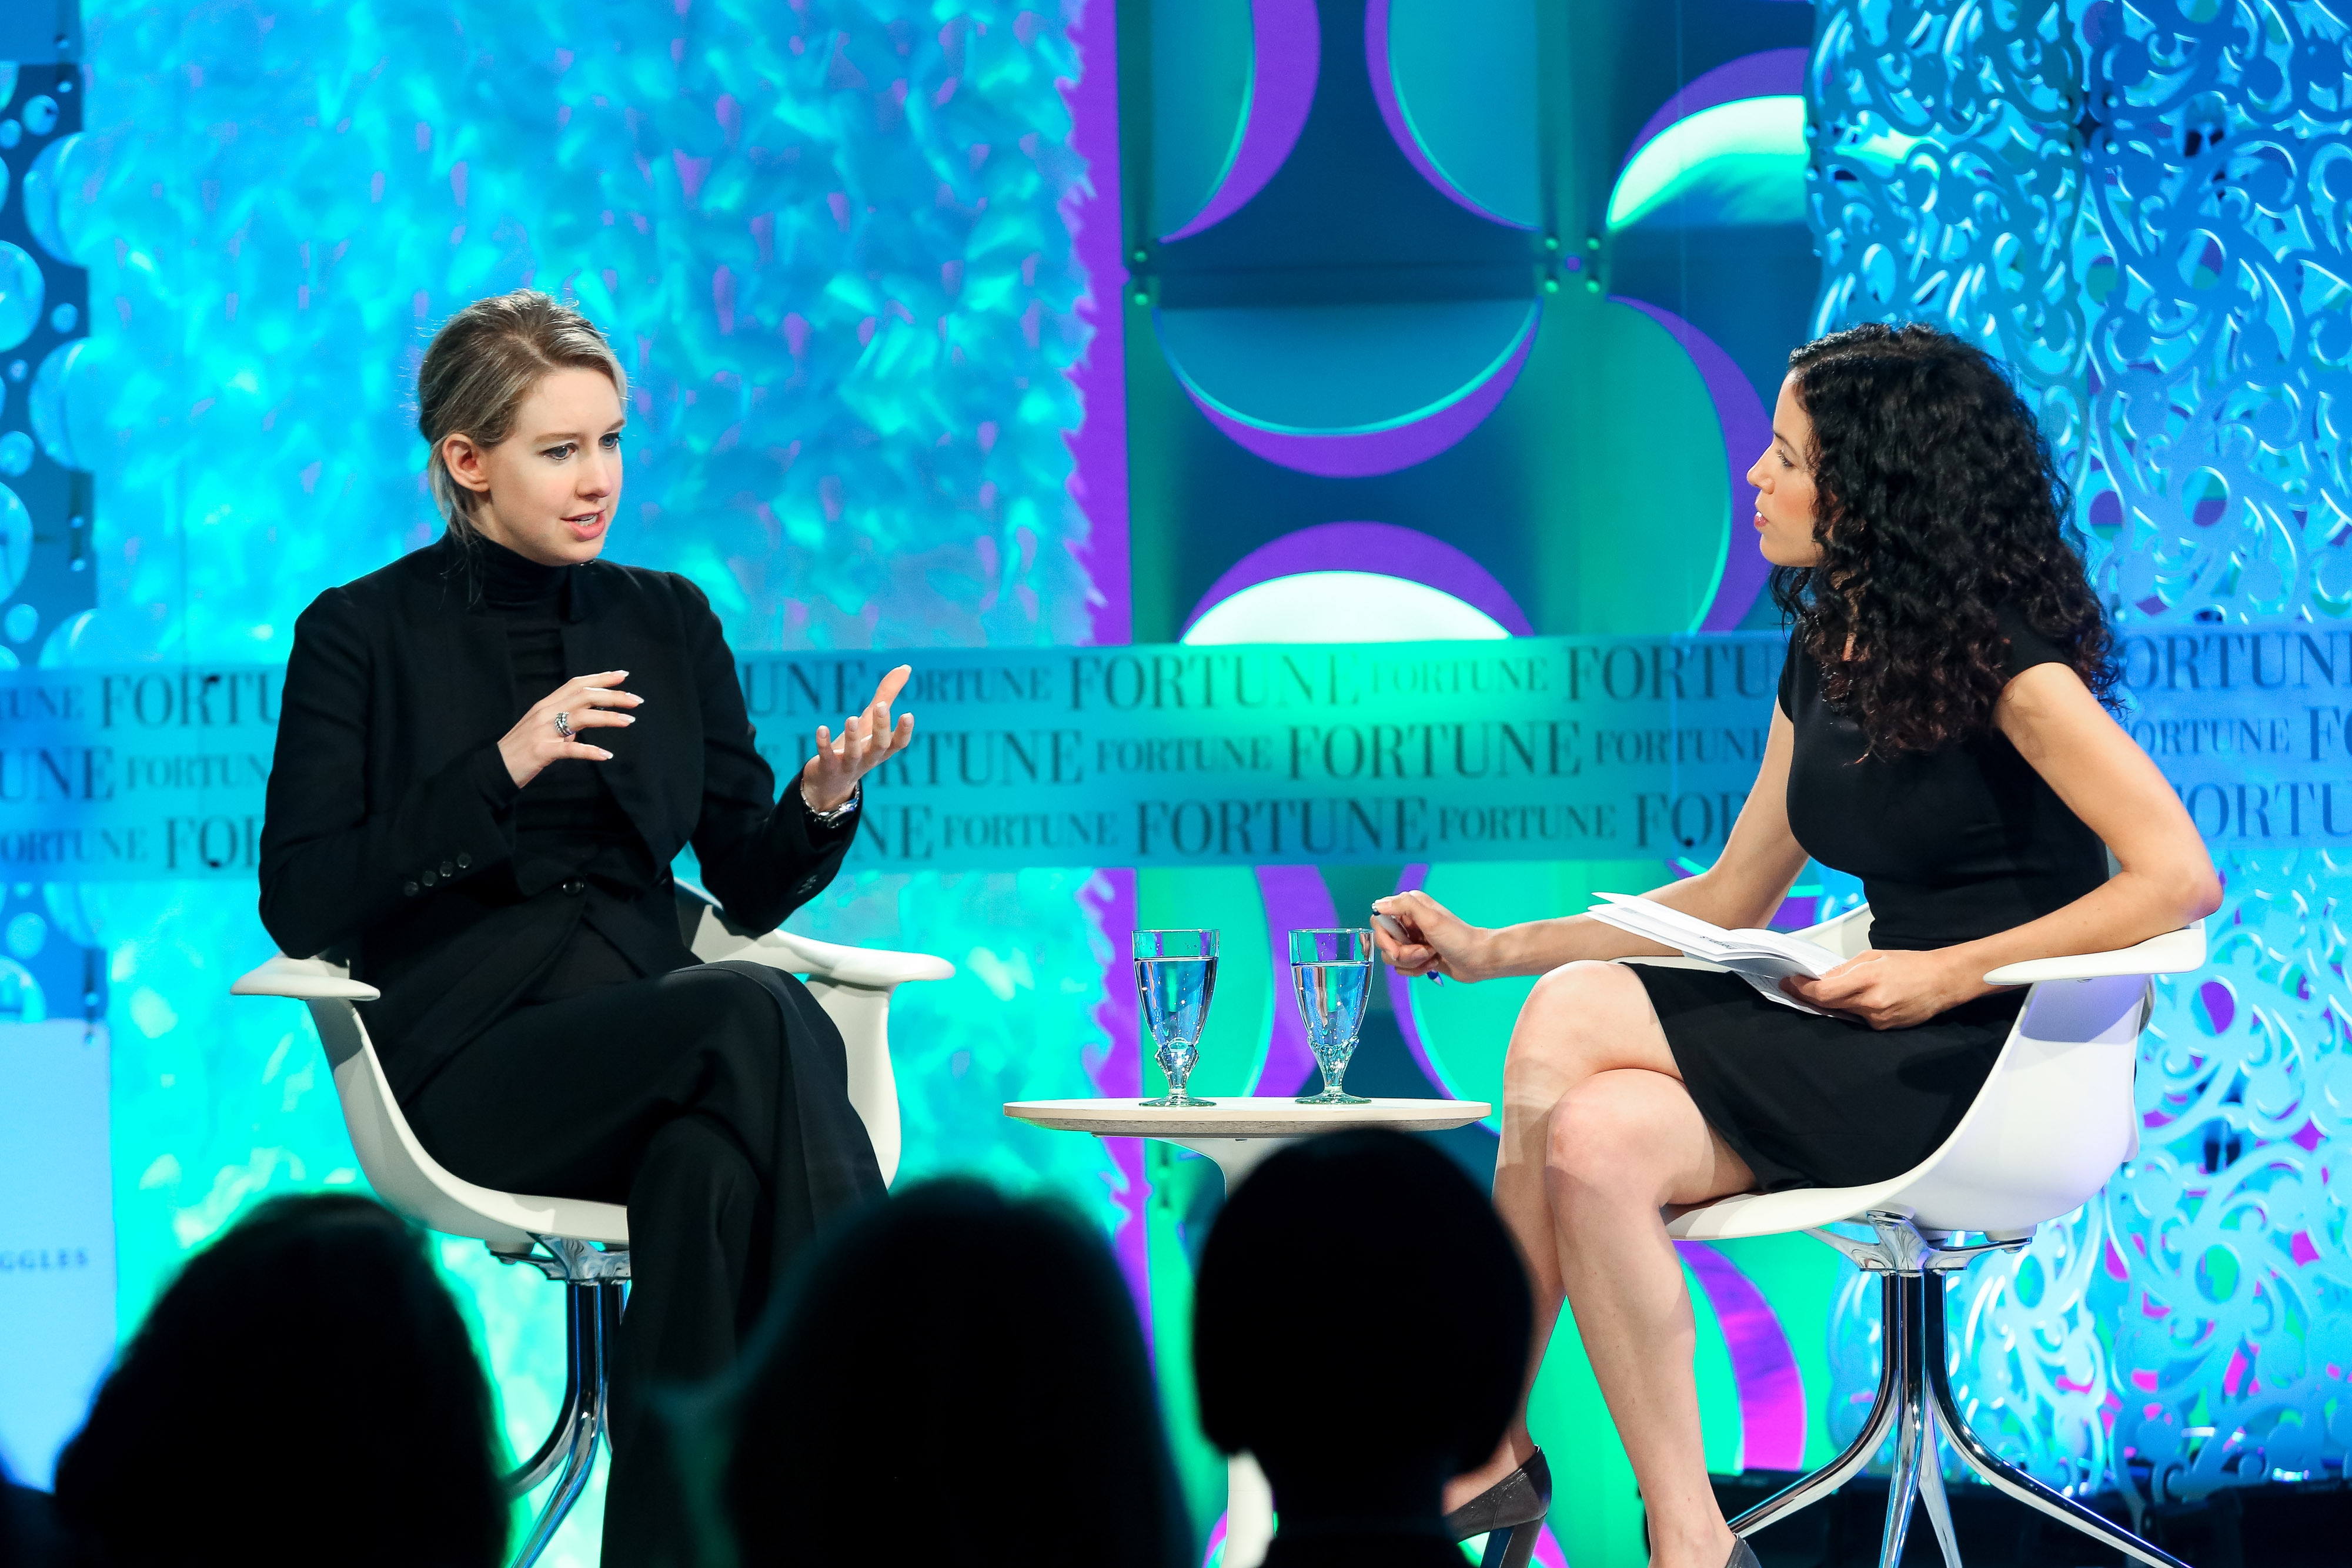 What marketers can learn from from Theranos and the Fyre Festival